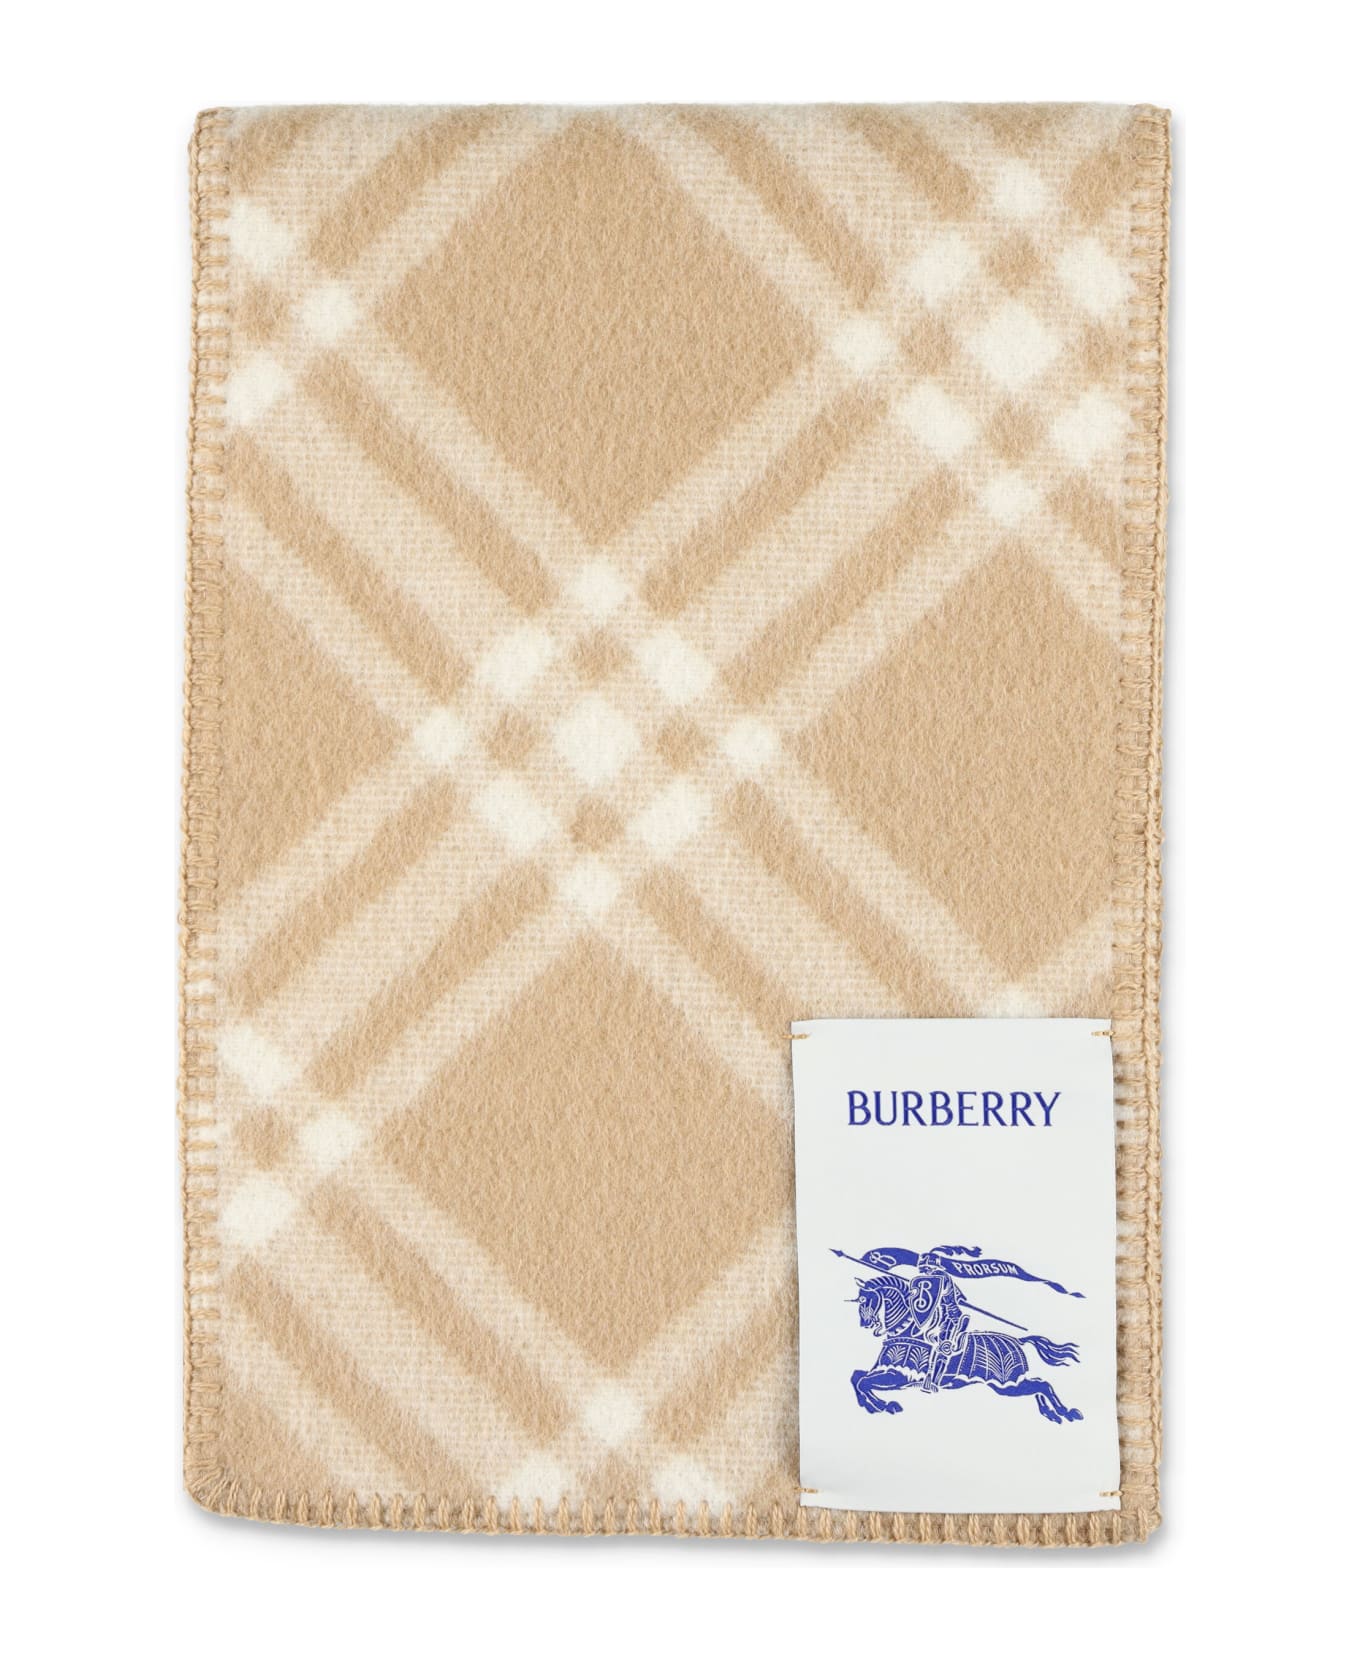 Burberry London Check Wool Scarf - ARCHIVE BEIGE CHECK スカーフ